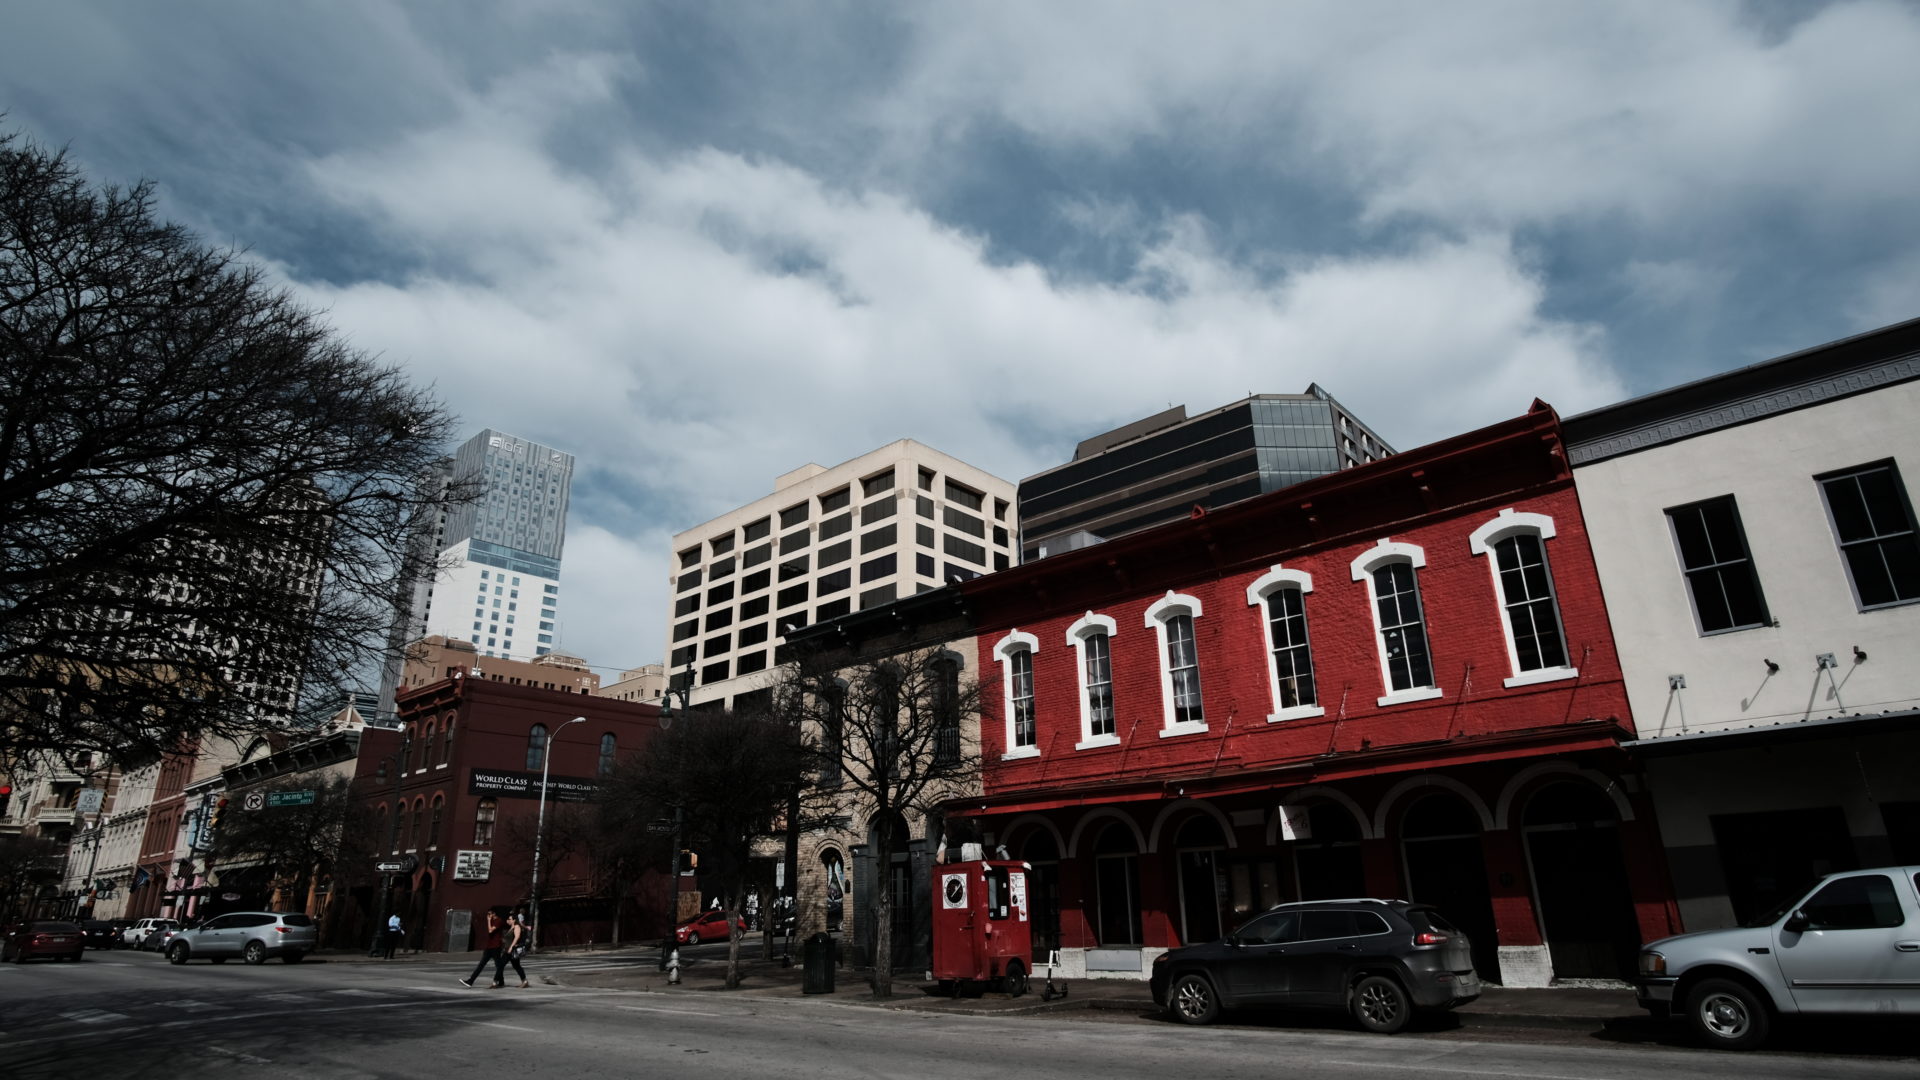 A scene of downtown Austin, with an older building painted in red